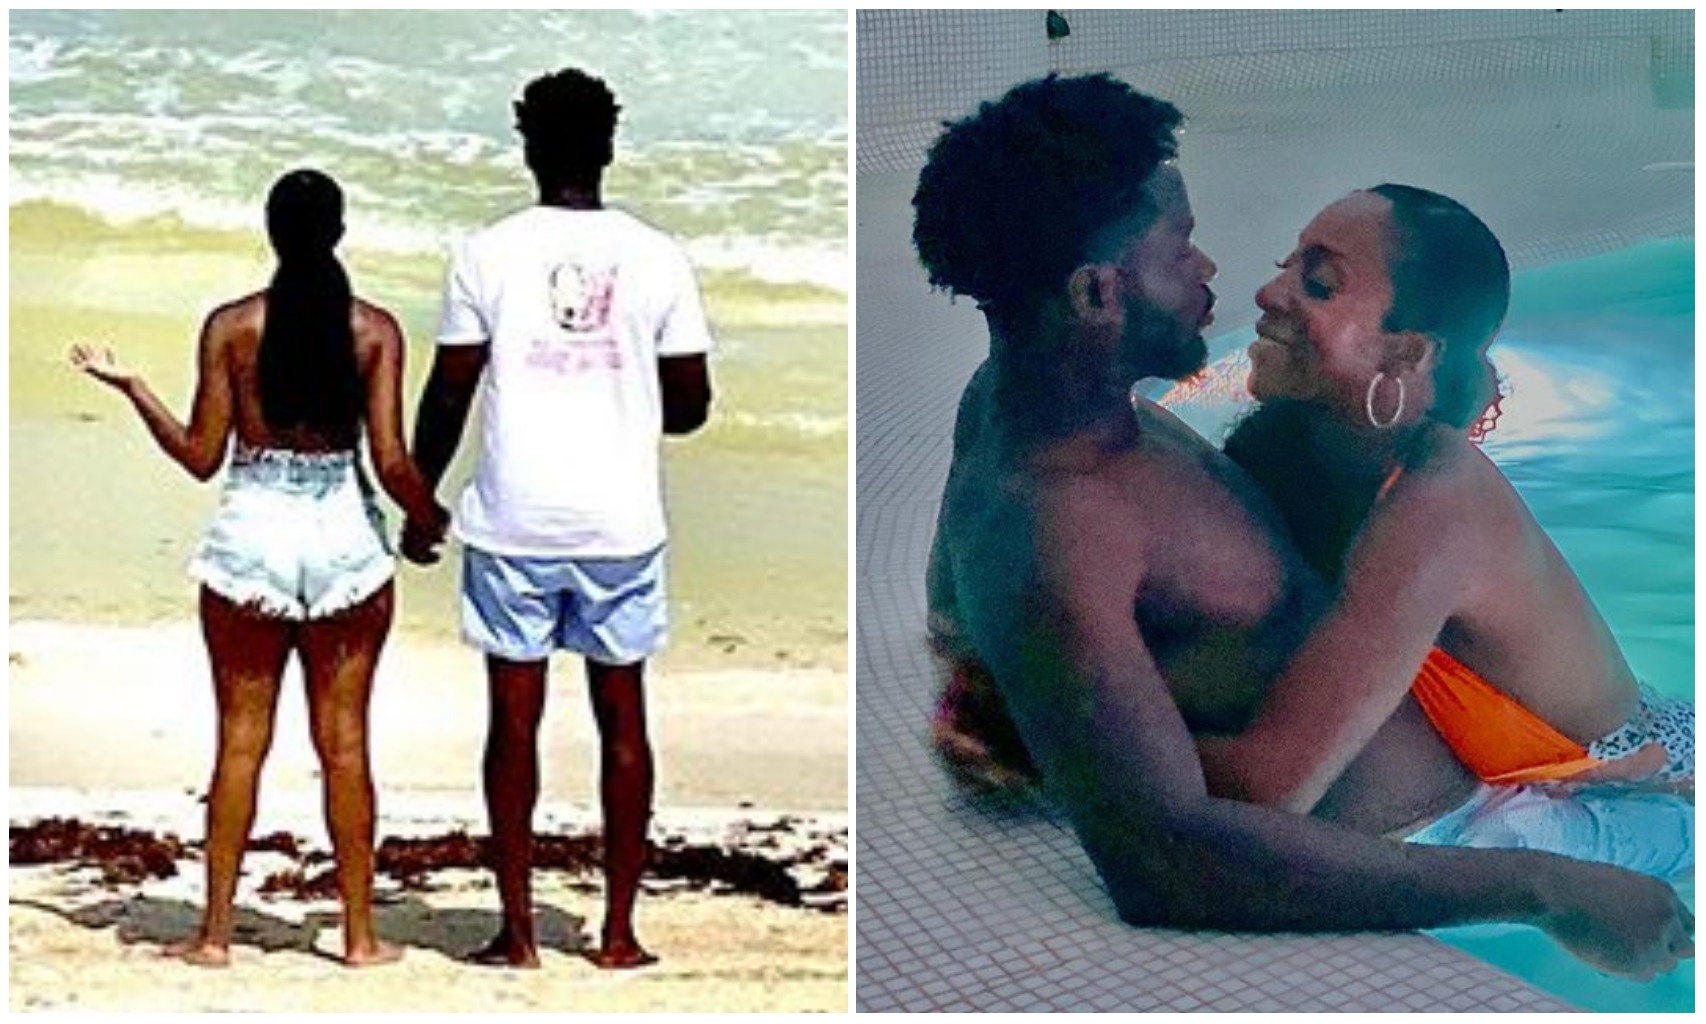 Tee Billz profess undying love to his new Girlfriend, shares more romantic photos